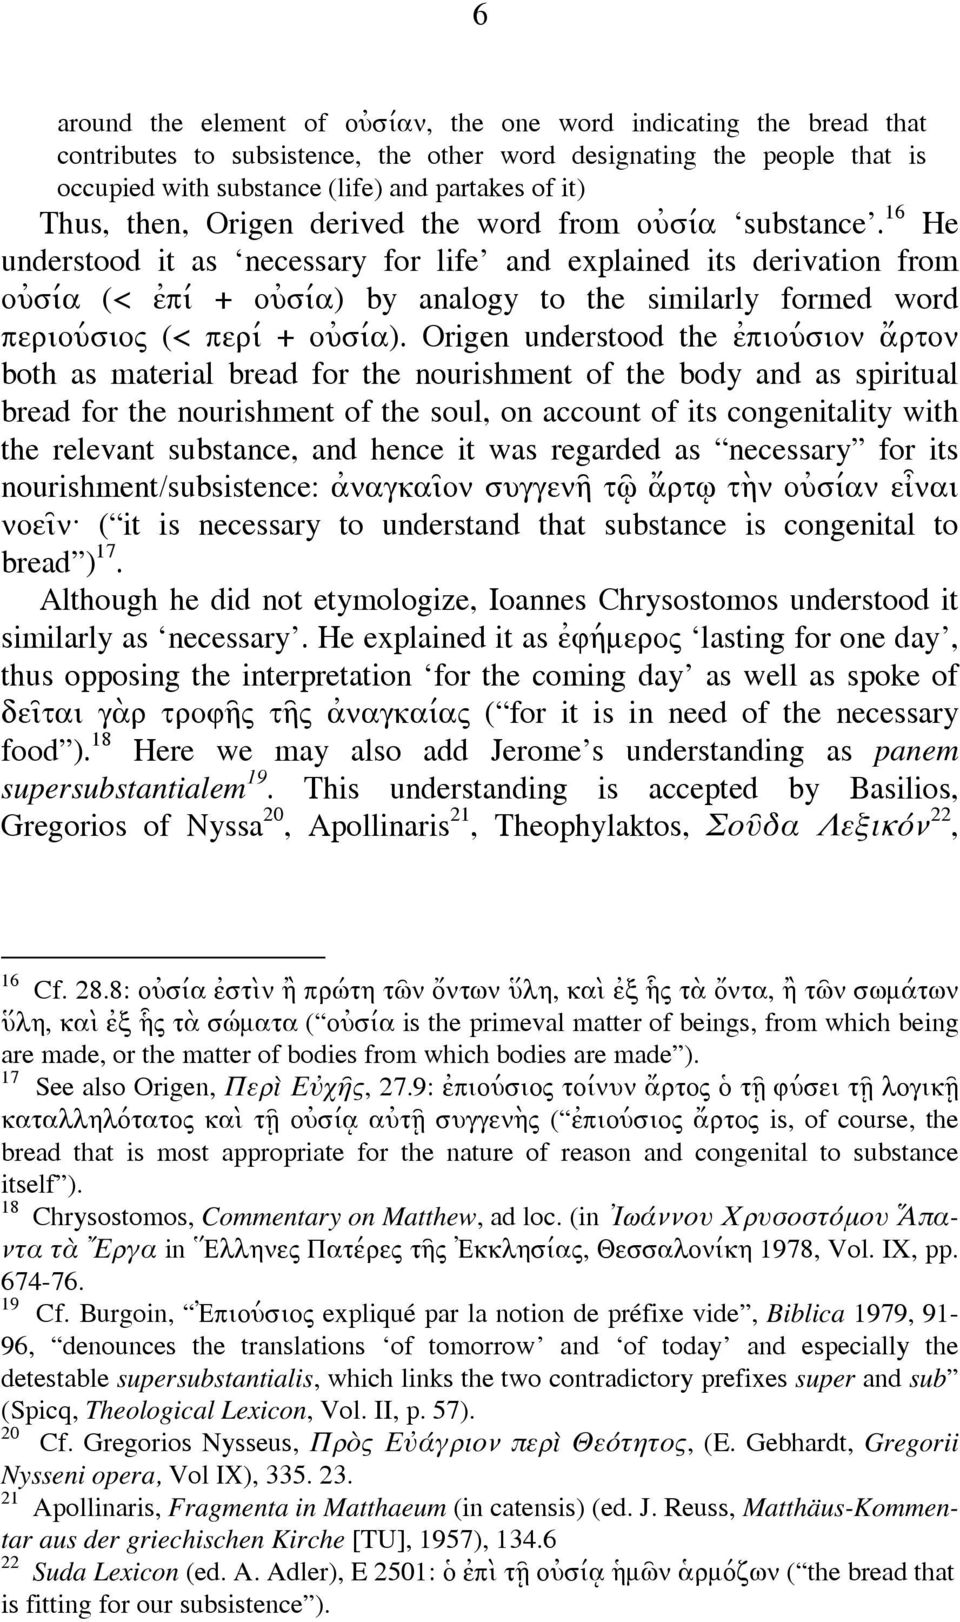 16 He understood it as necessary for life and explained its derivation from οὐσία (< ἐπί + οὐσία) by analogy to the similarly formed word περιούσιος (< περί + οὐσία).